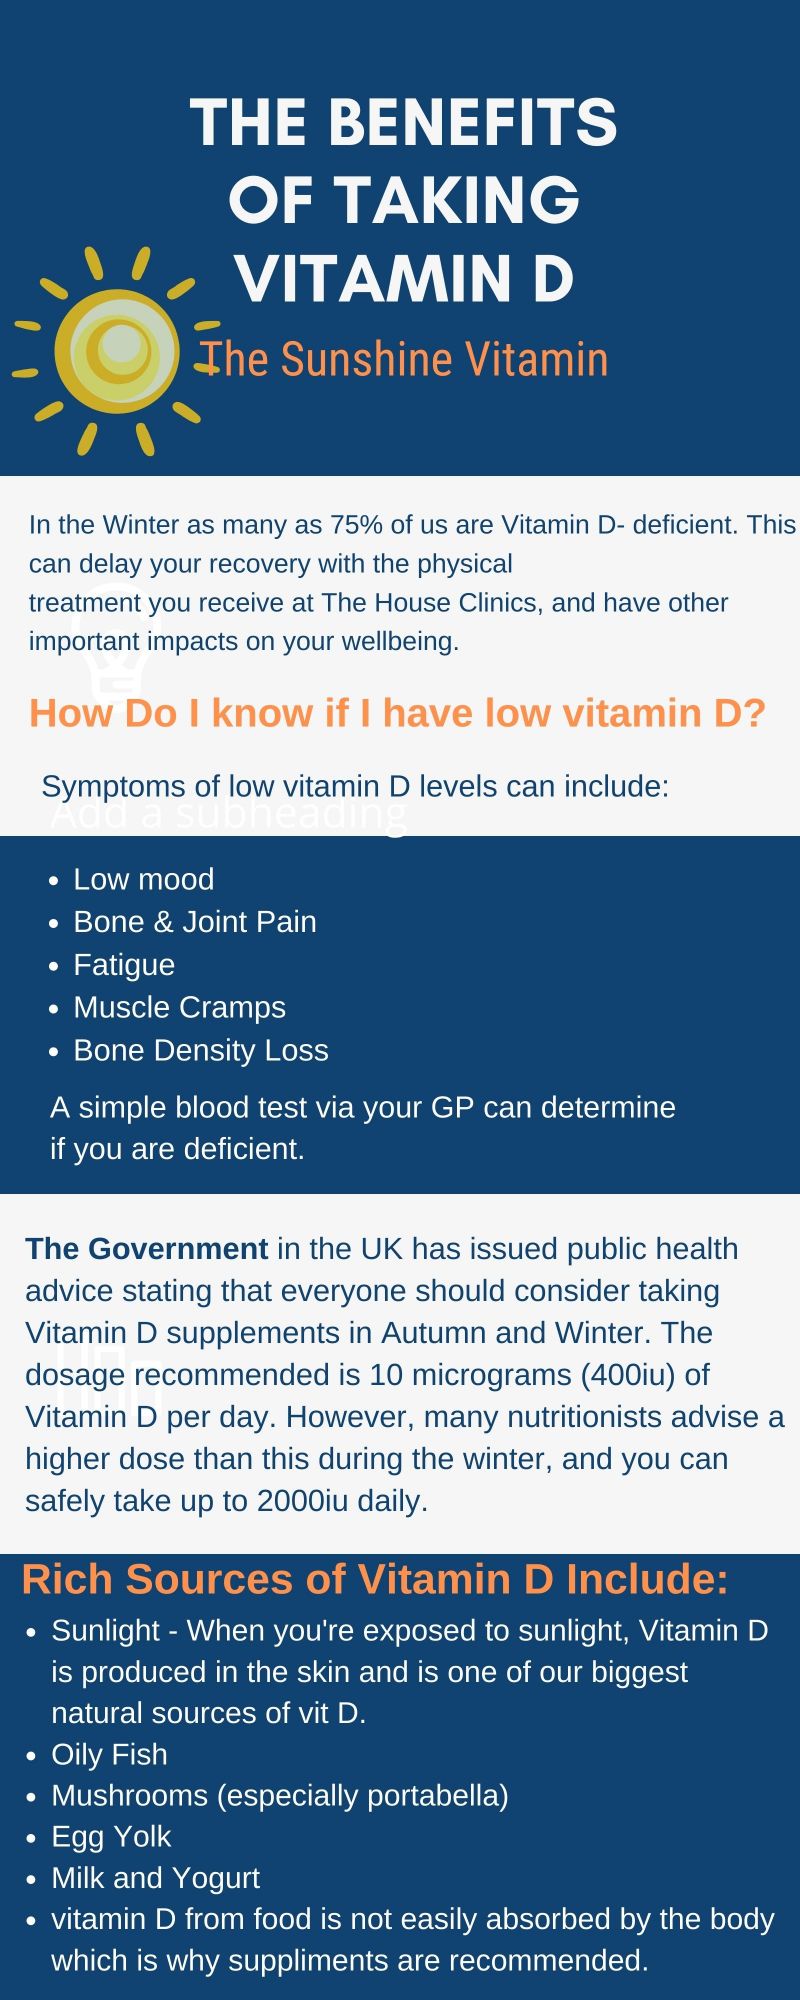 Vitamin D deficiency - signs and symtptoms, benefits of taking a supplement. The House Clinics, Bristol